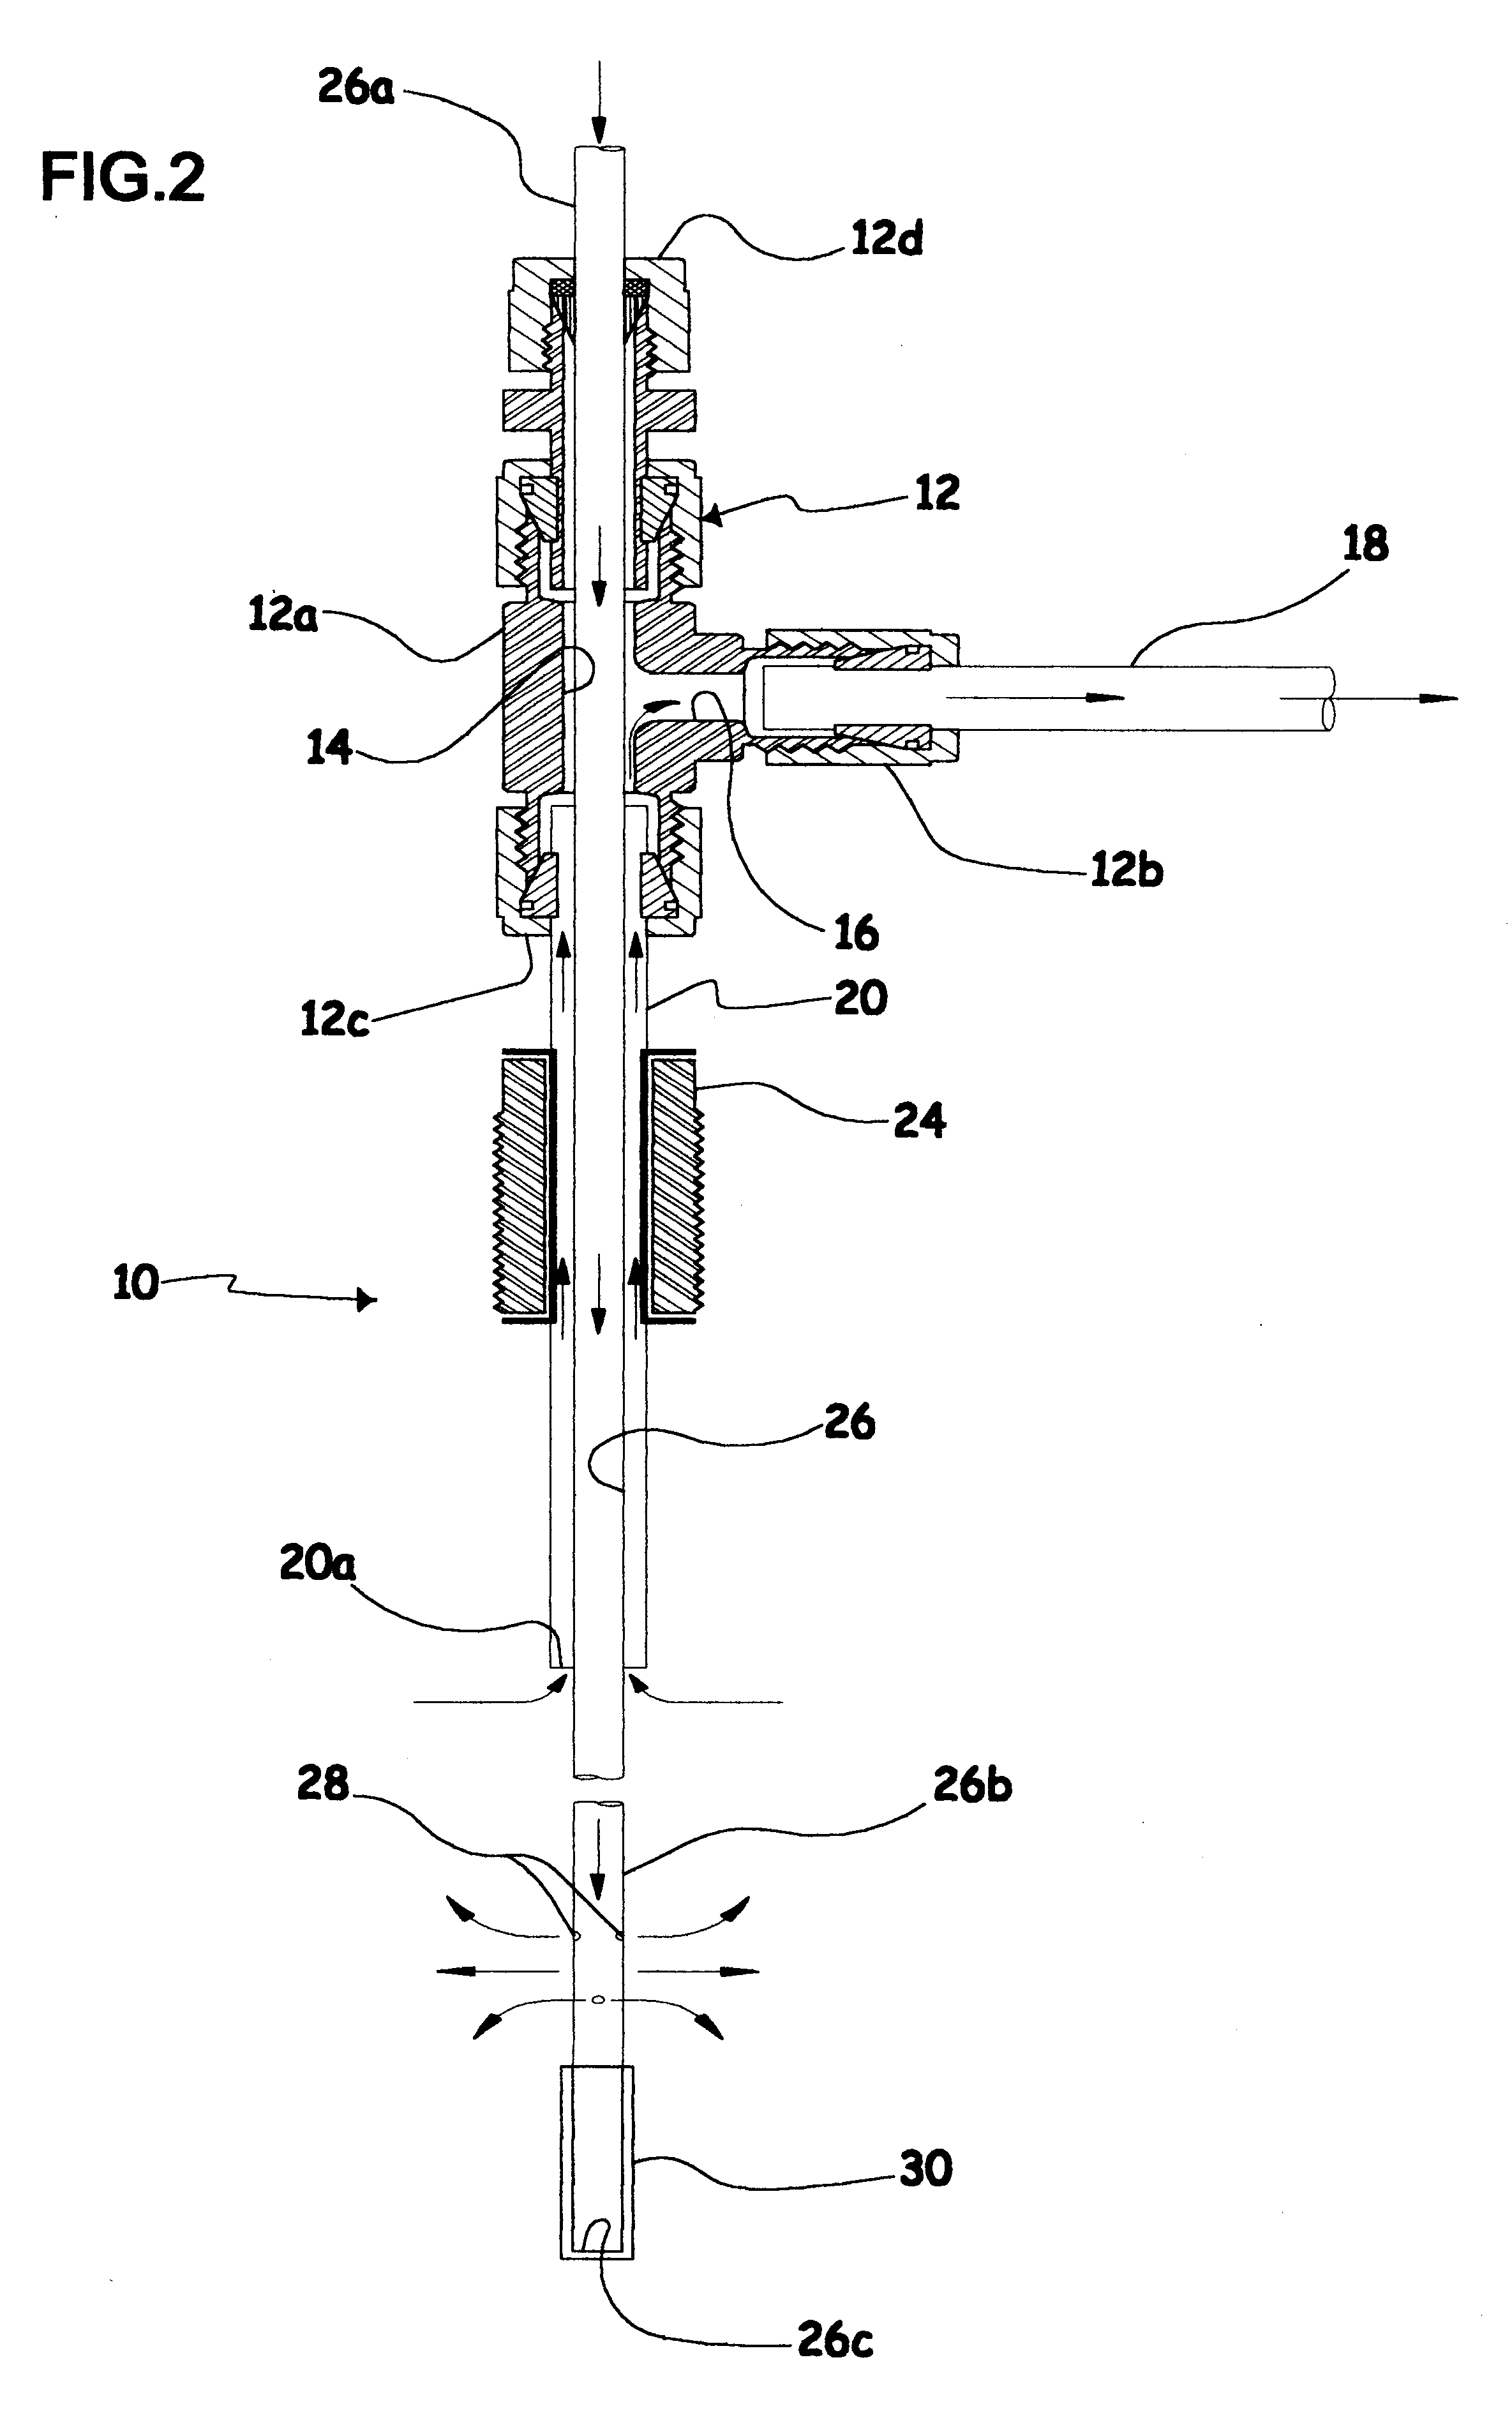 Method for testing soil contamination, and probe therefor